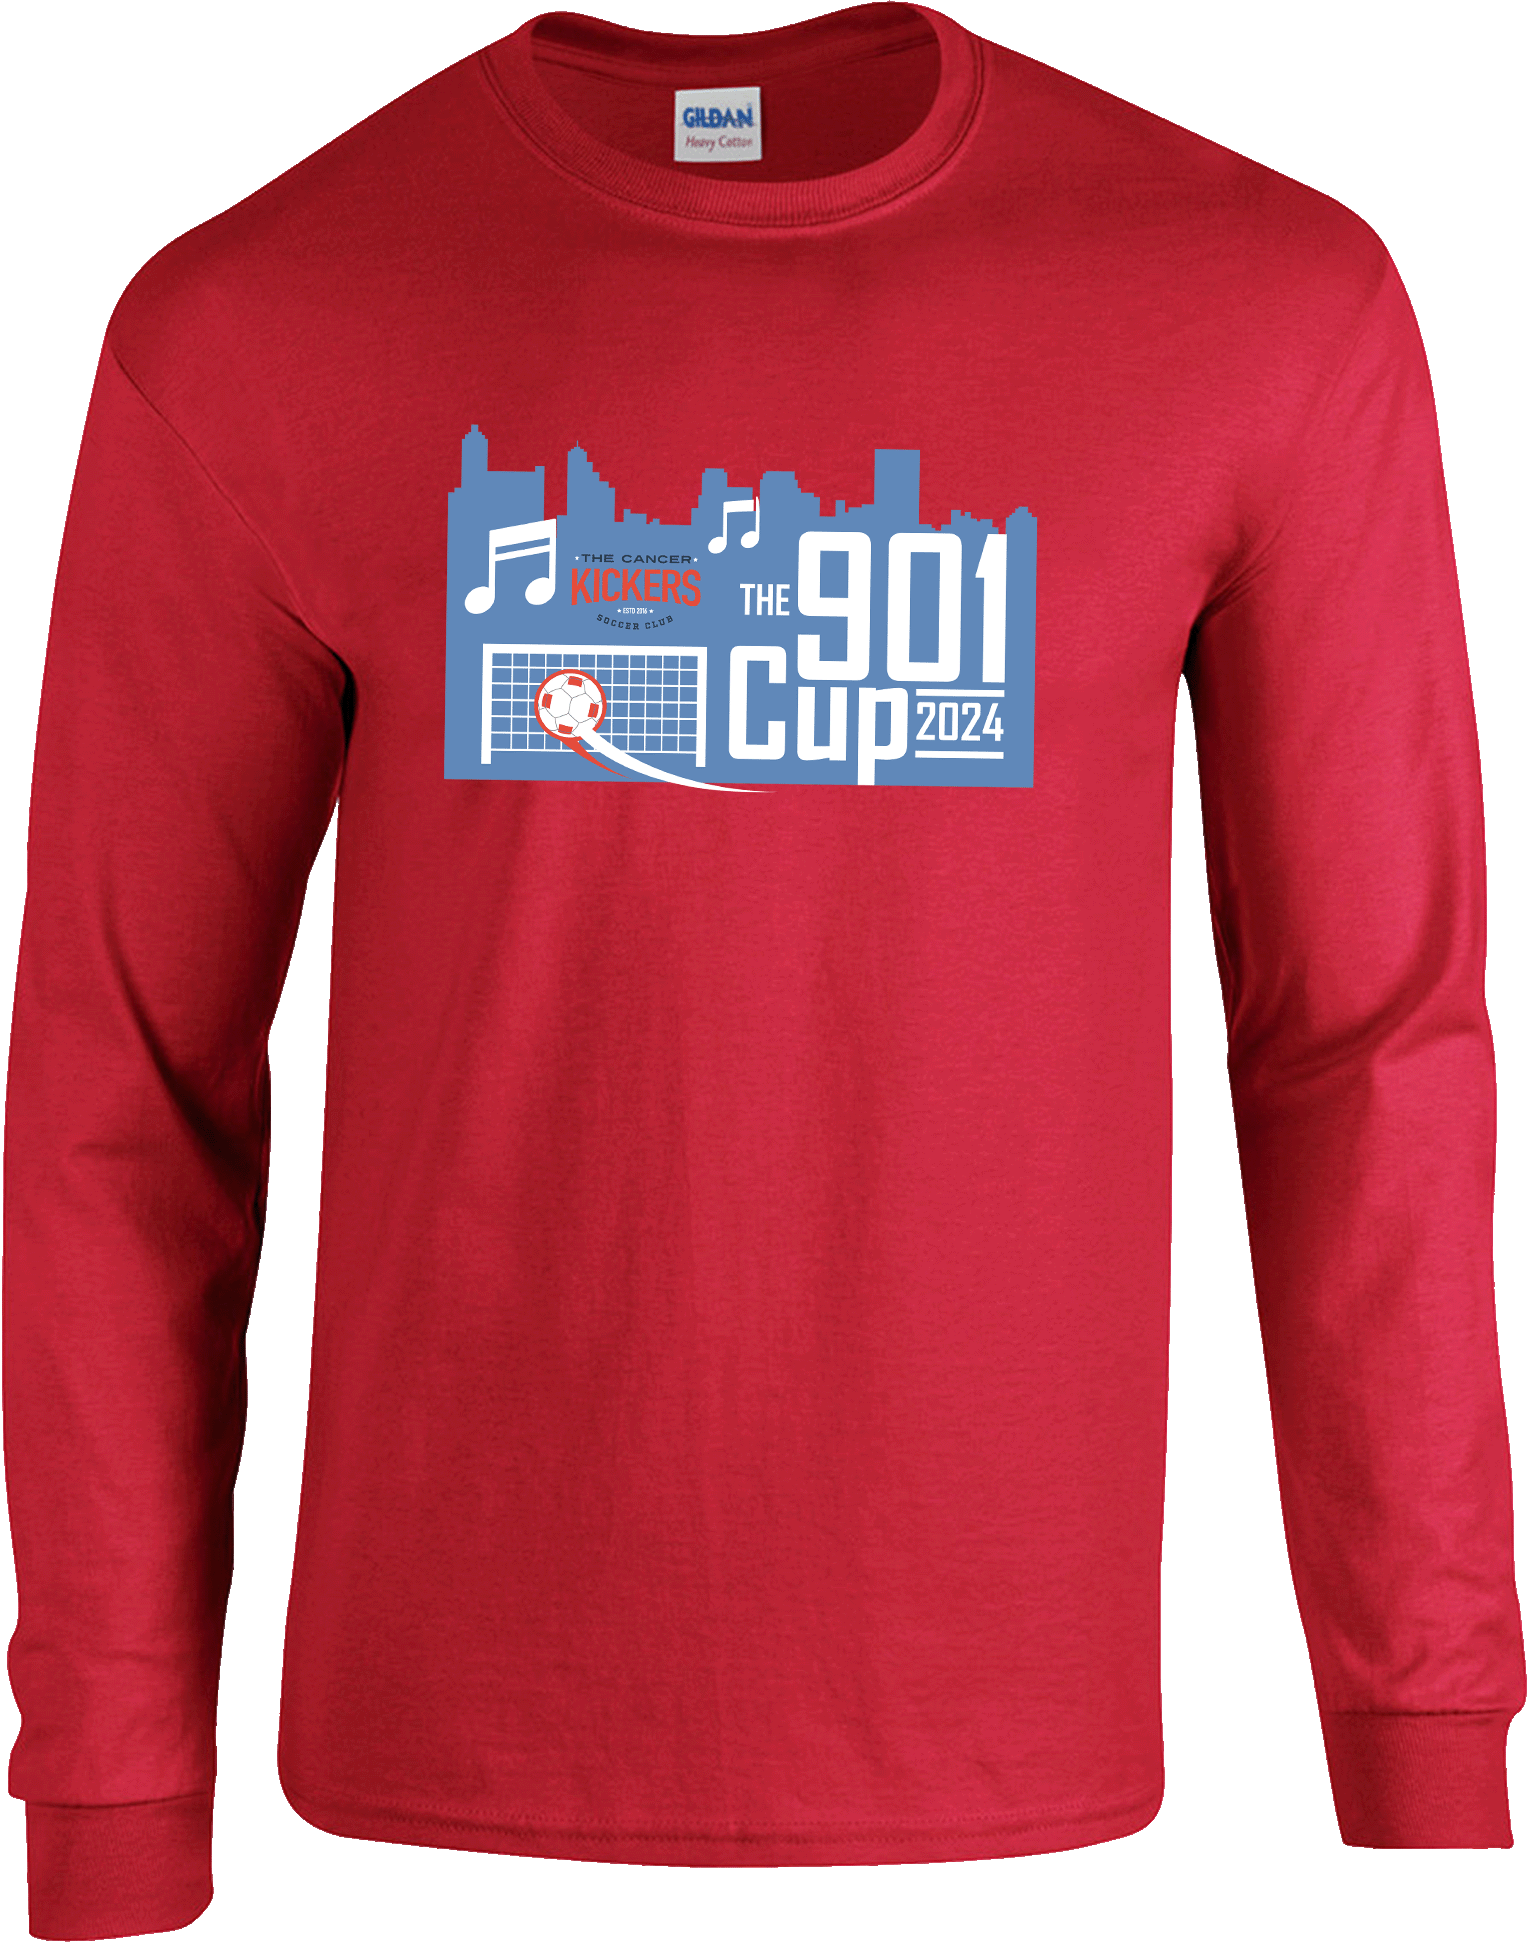 Long Sleeves - 2024 The 901 Cup